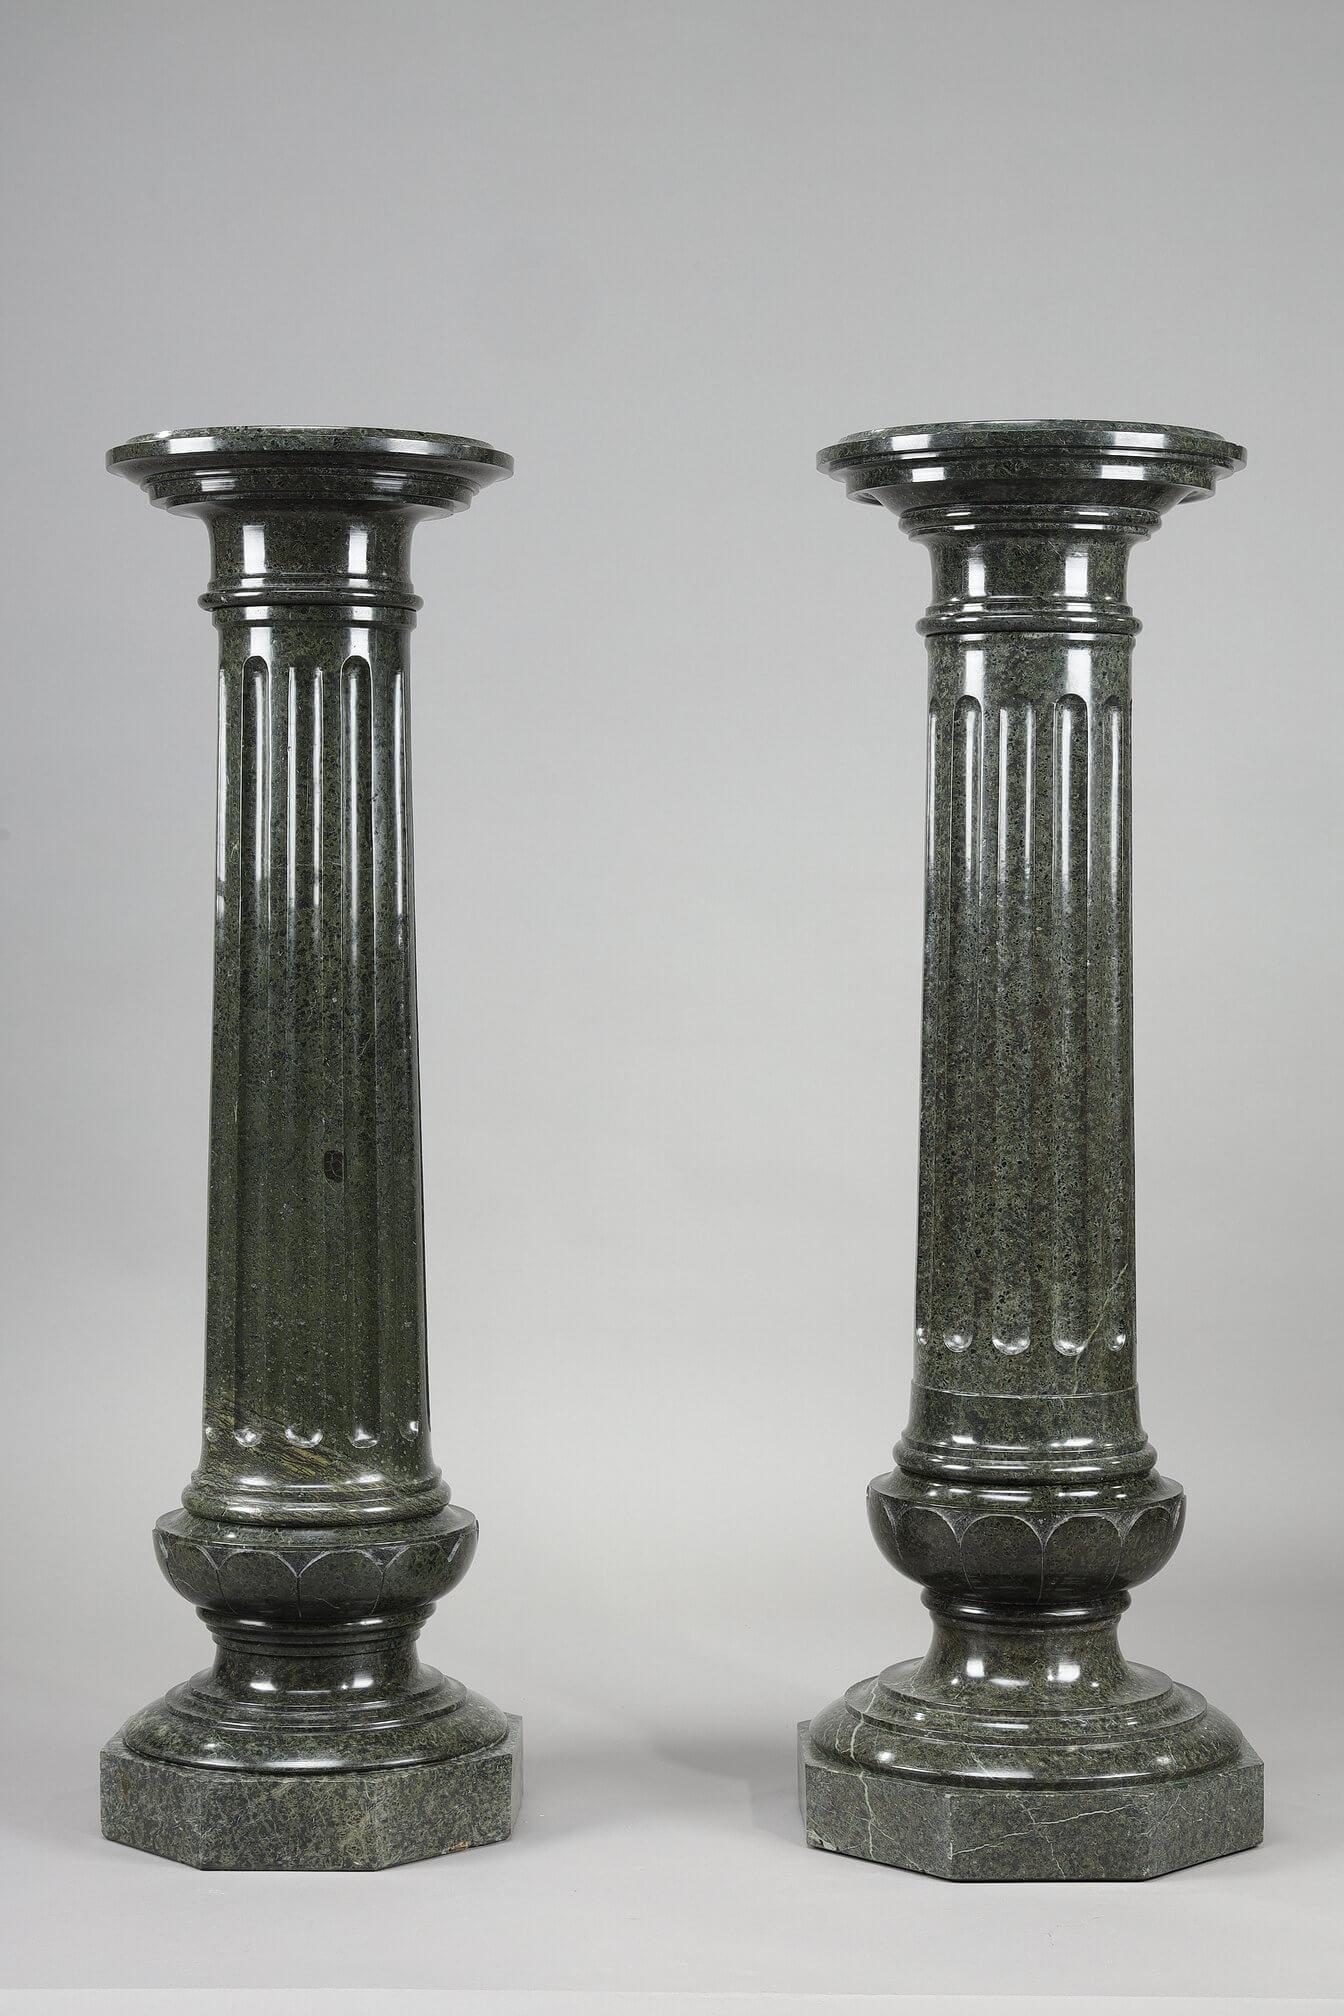 Two large columns in green veined marble with wide flutes, of different shapes but which can form a pendant set. Octagonal base.

Dim: W: 35cm, D: 35cm, H: 109cm.
Dim: W: 13,8in, D: 13,8in, H: 42,9in.

Diameter of circular tray:
- Column 1: 28 cm
-